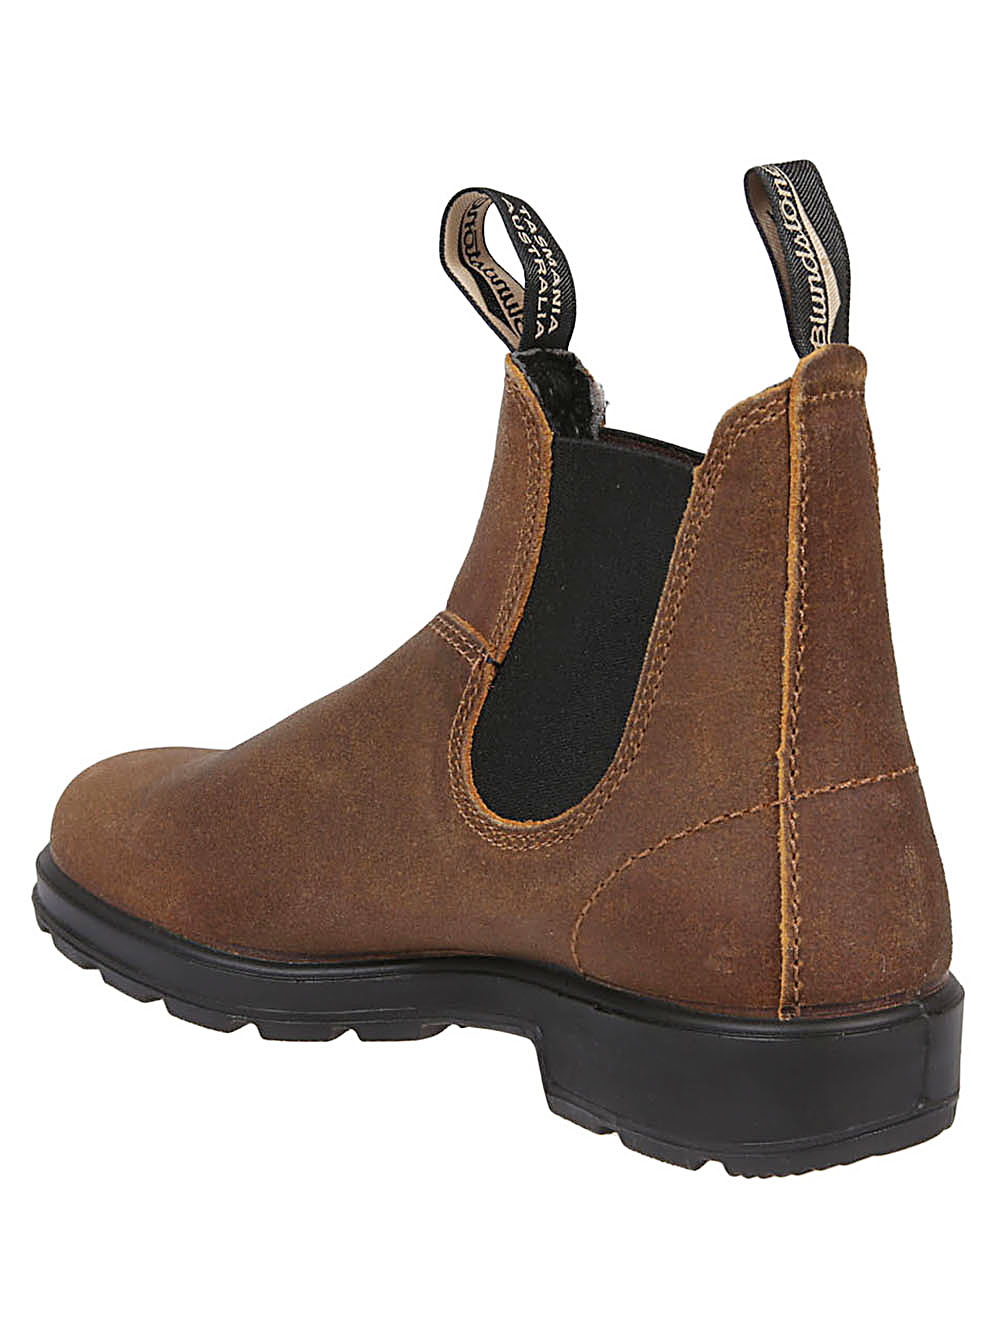 Blundstone BLUNDSTONE- 1911 Leather Chelsea Boots